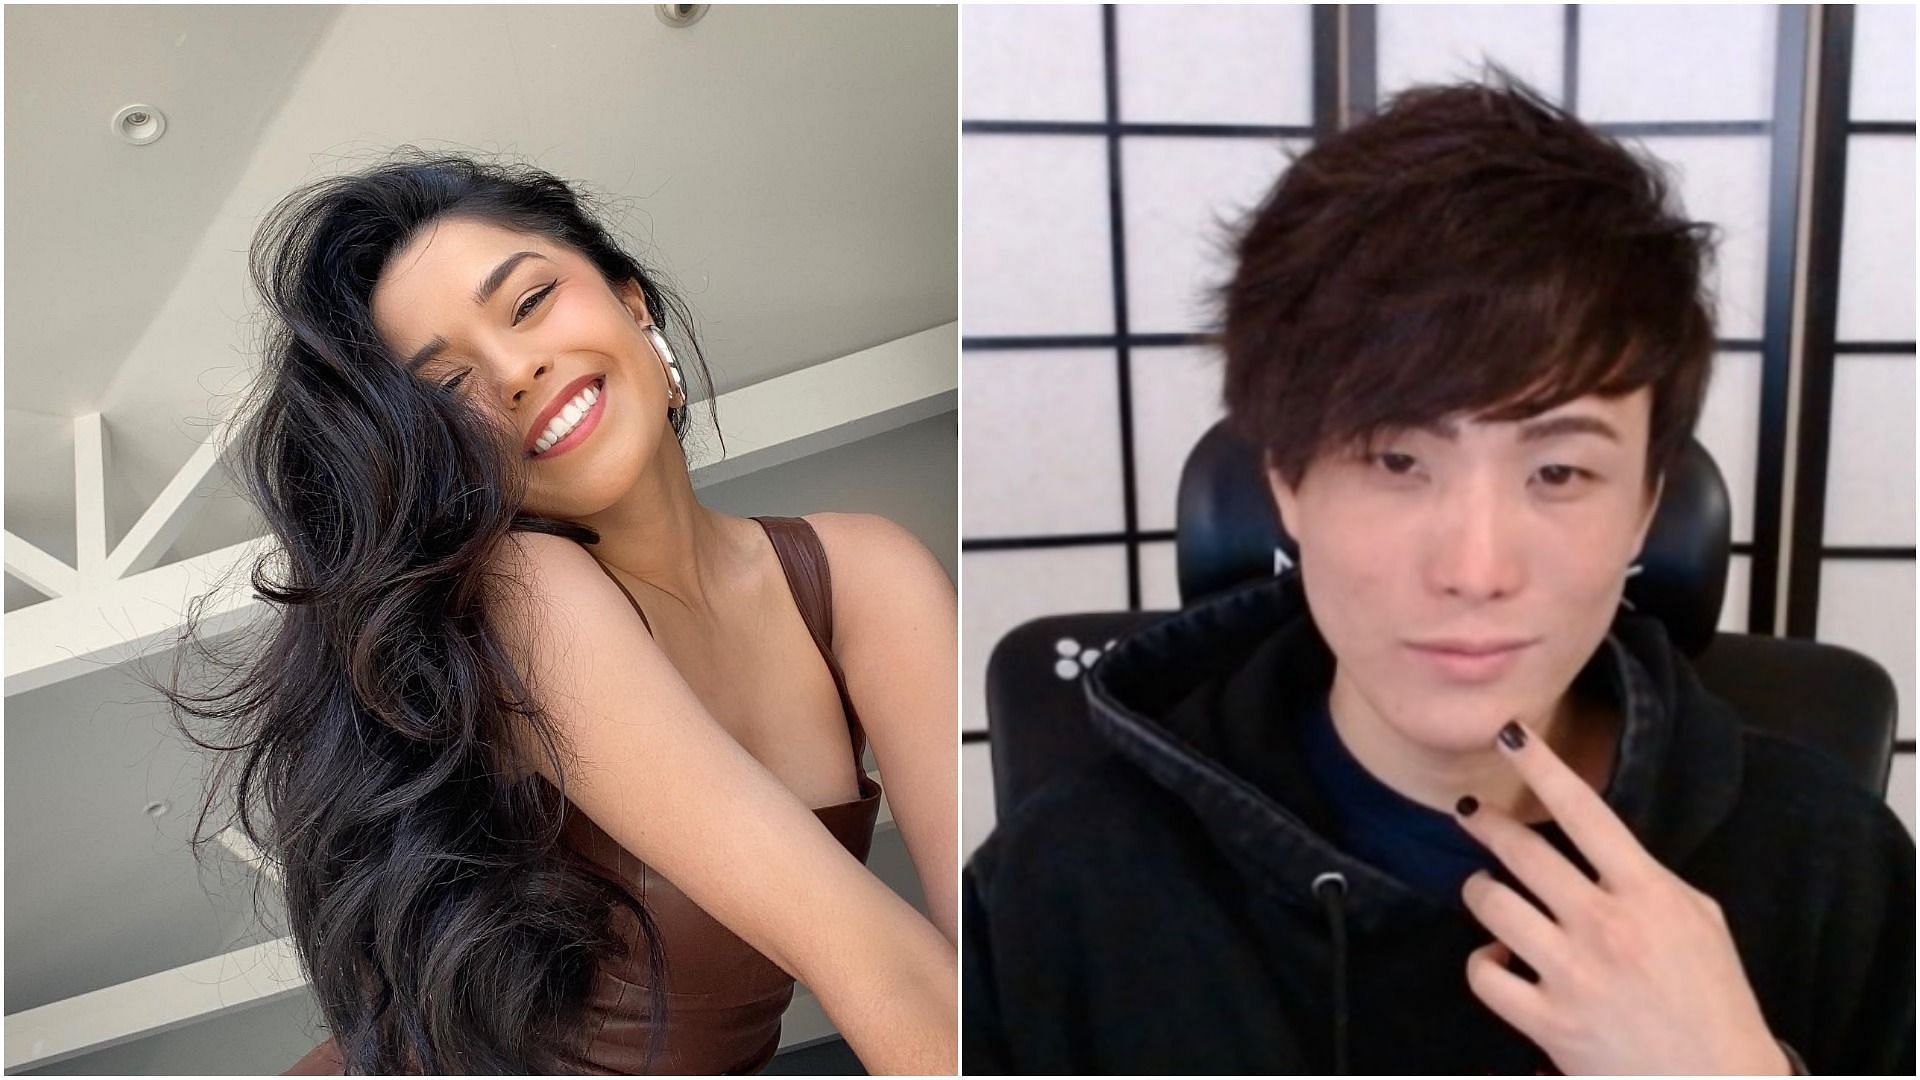 Valkyrae says Sykkuno is like a brother to her (Images via Valkyrae and Sykkuno/Twitter)